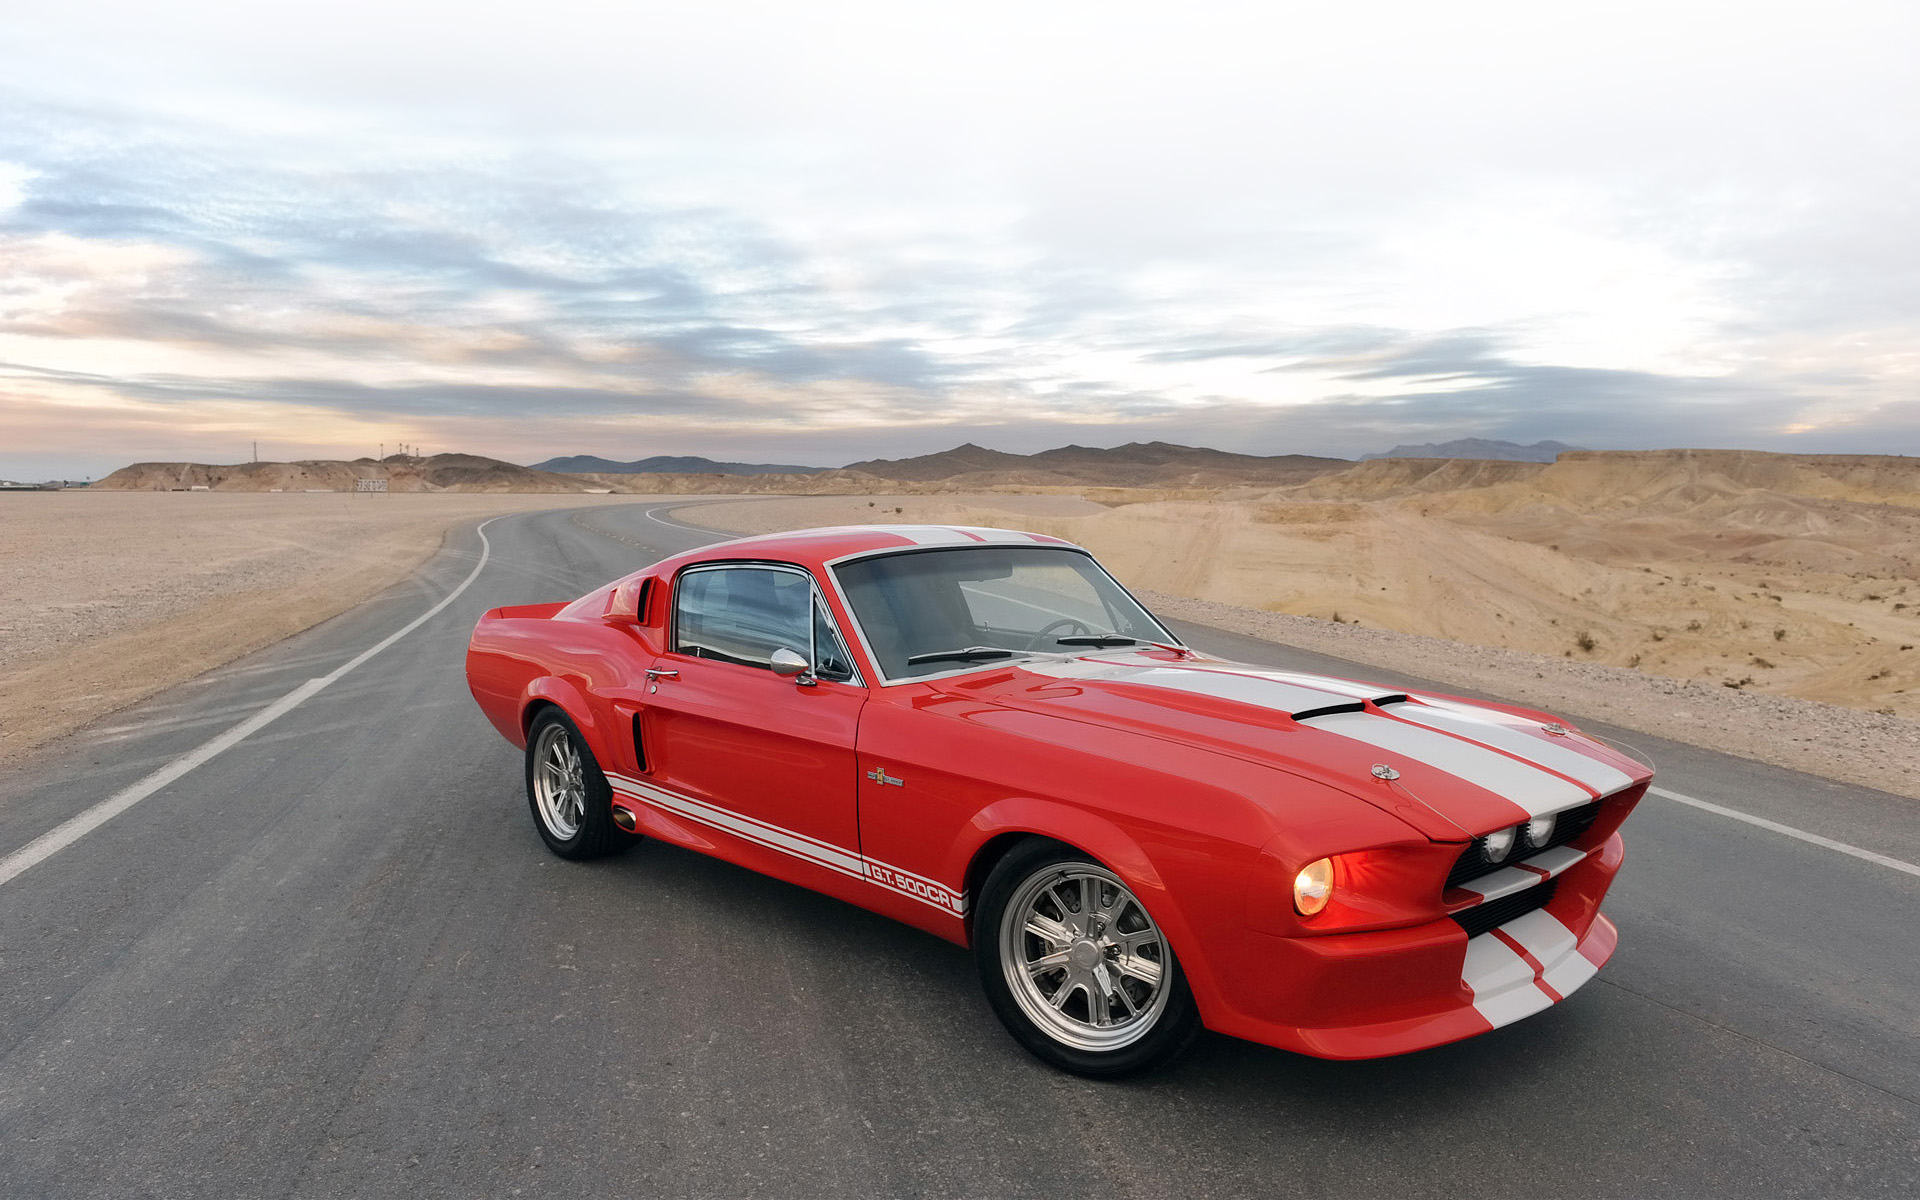  2010 Shelby Classic Recreations GT500CR Wallpaper.